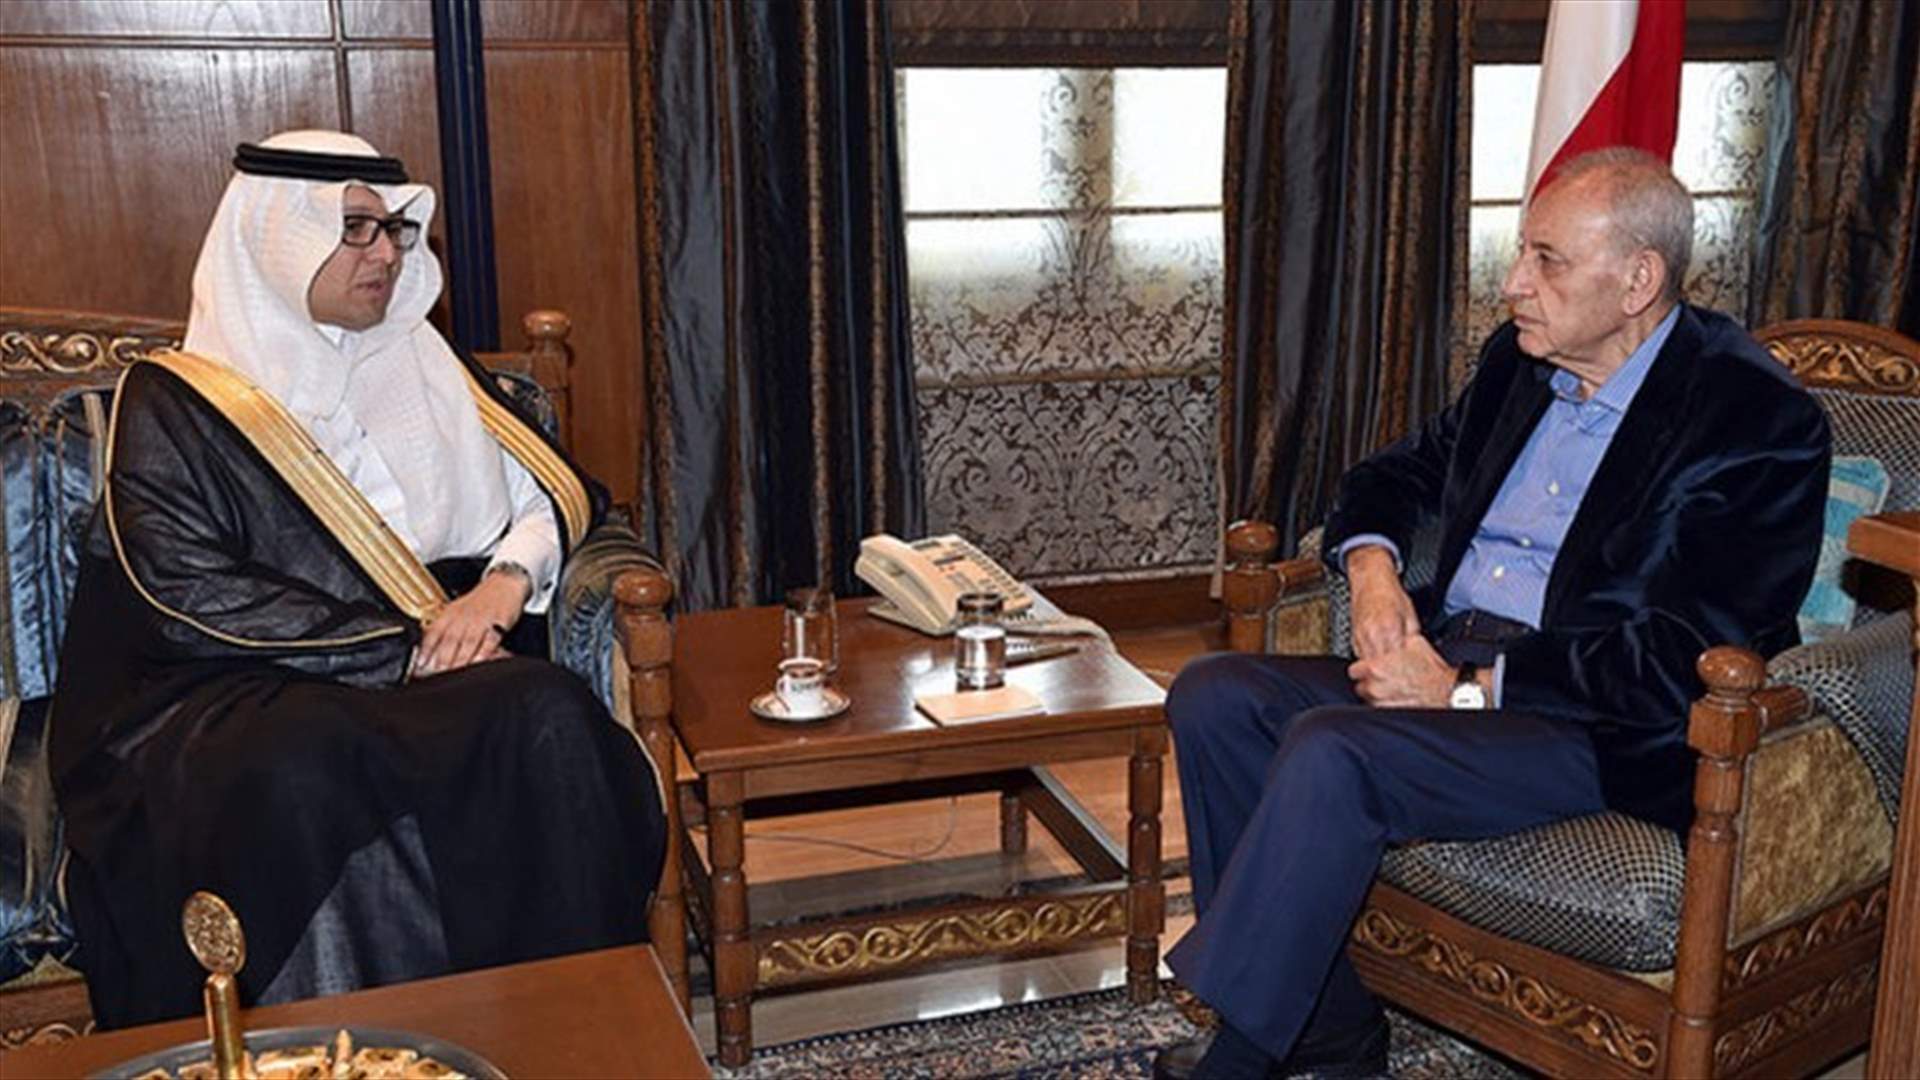 Bukhari meets with Berri in Ain al-Tineh, stresses kingdom’s support for Lebanon’s security and stability